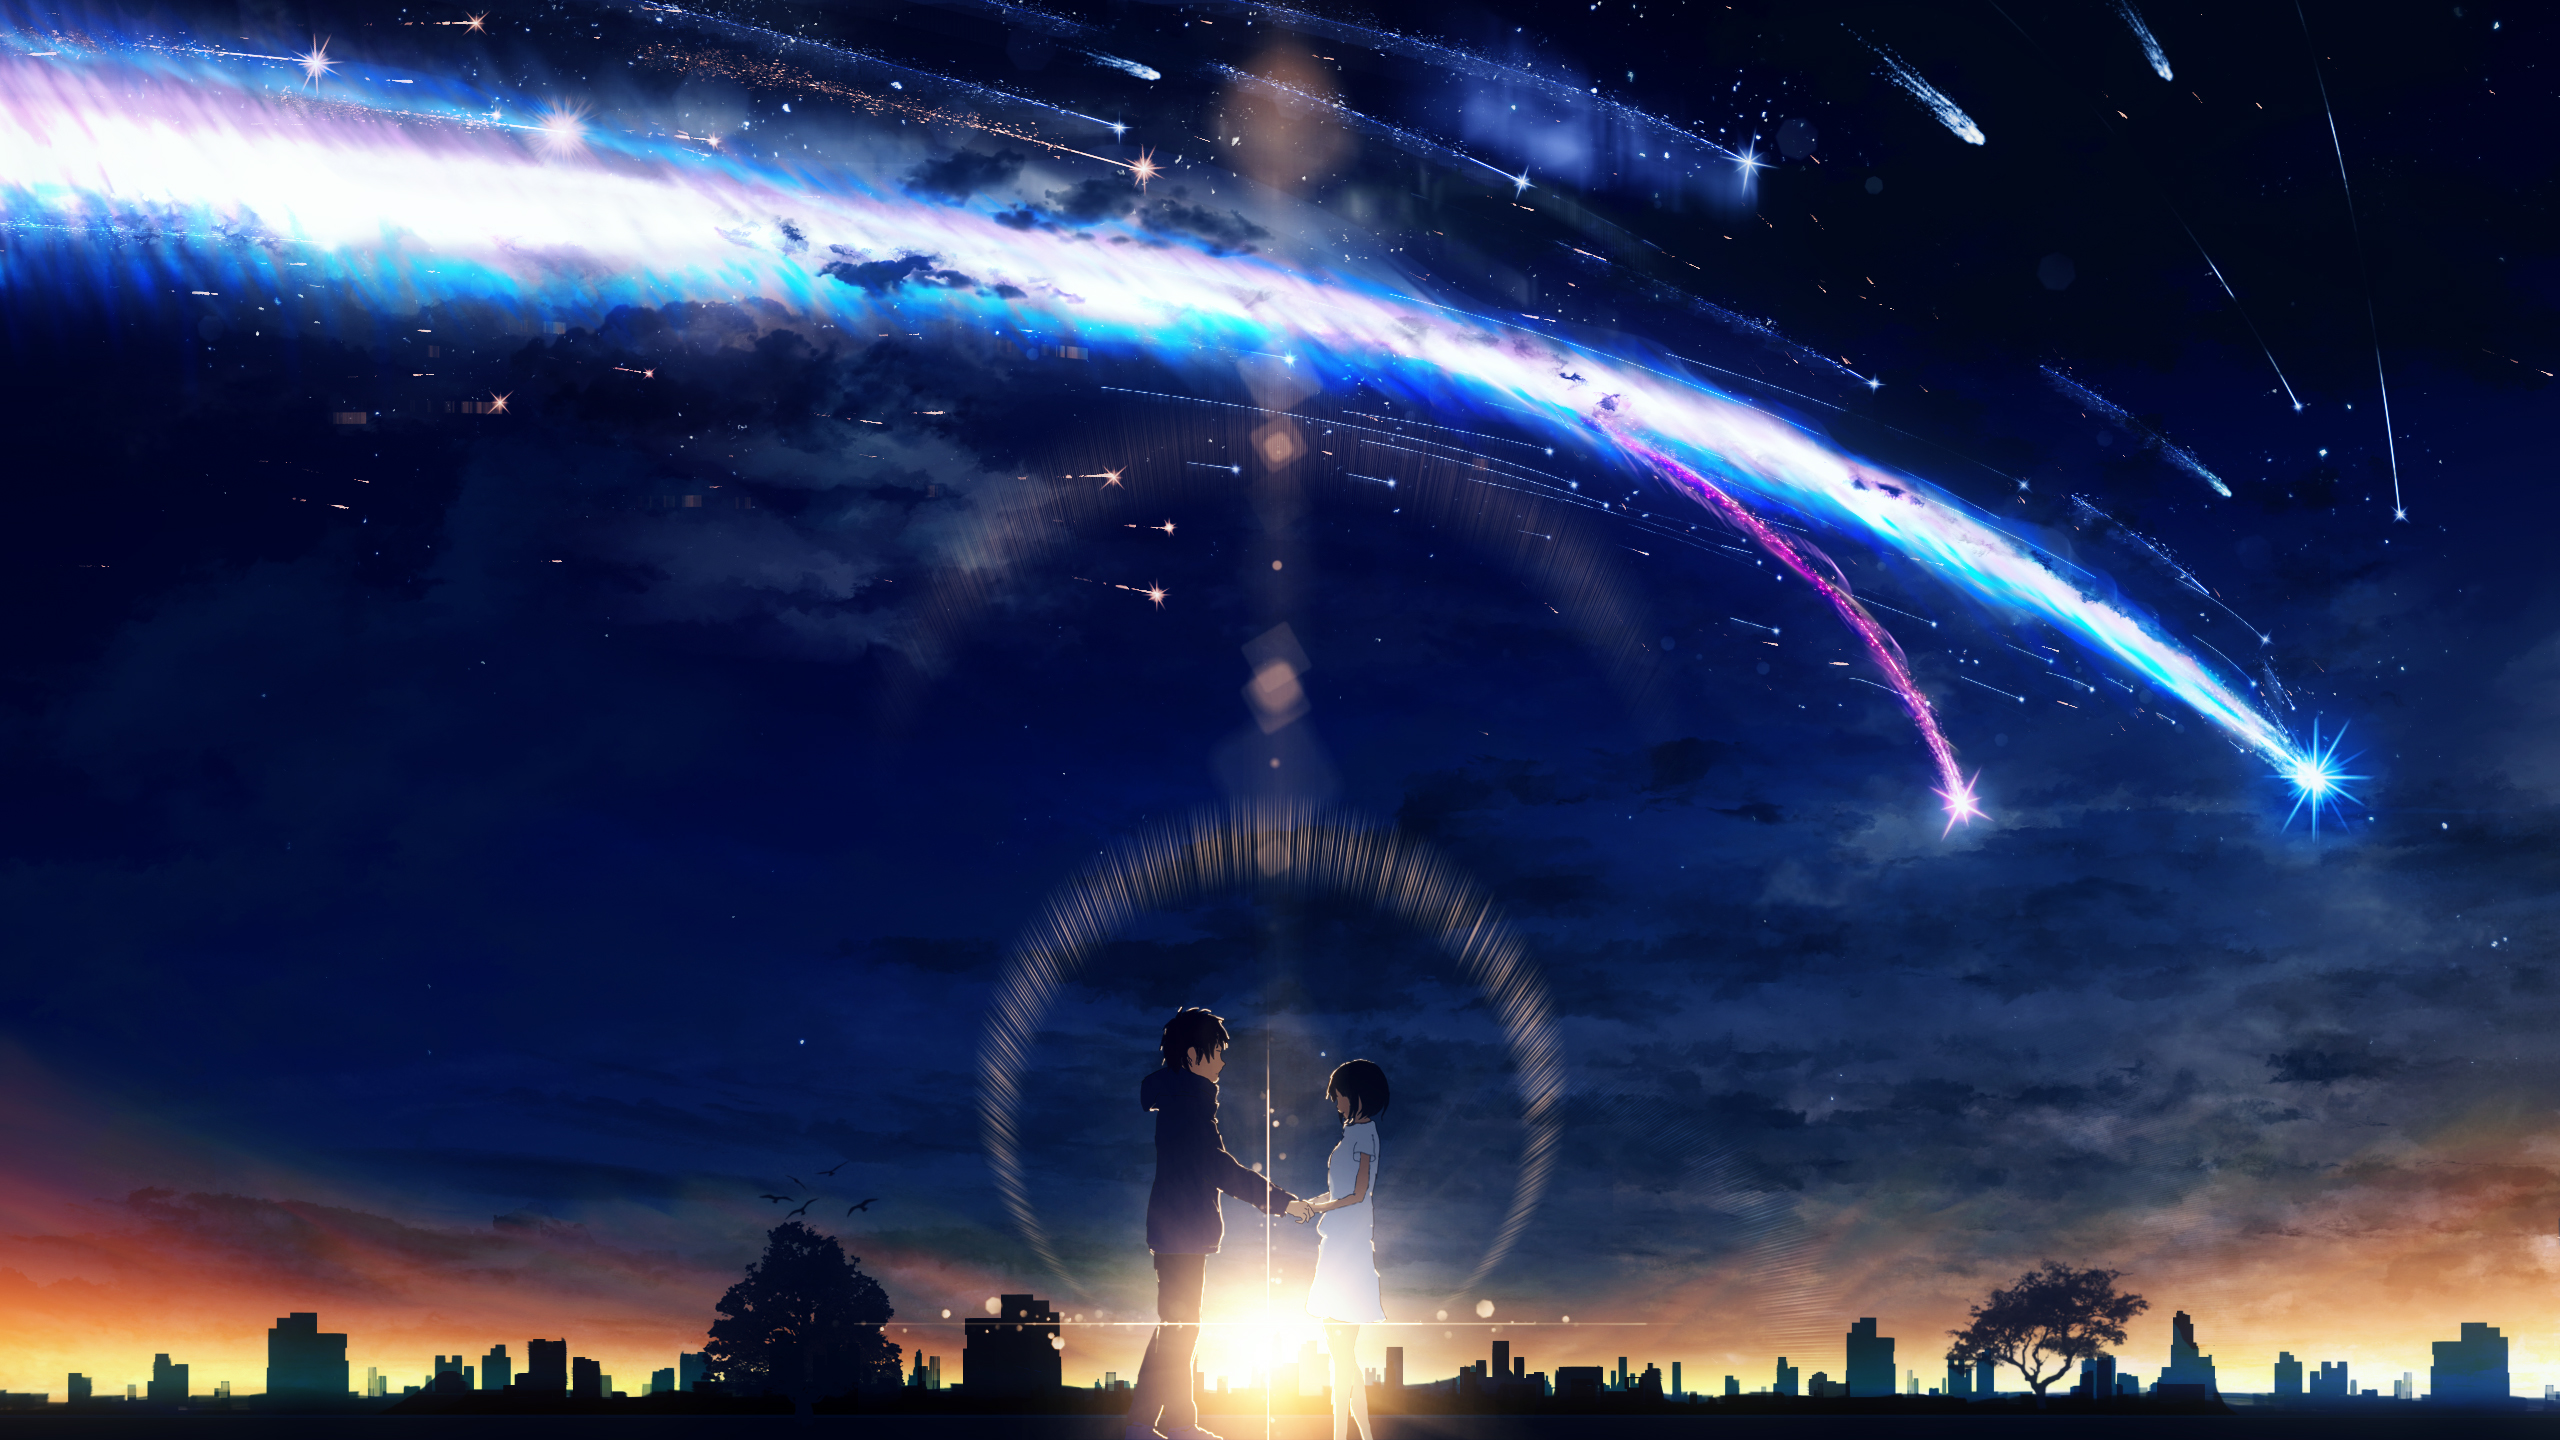 your name anime wallpaper,sky,nature,light,atmosphere,space